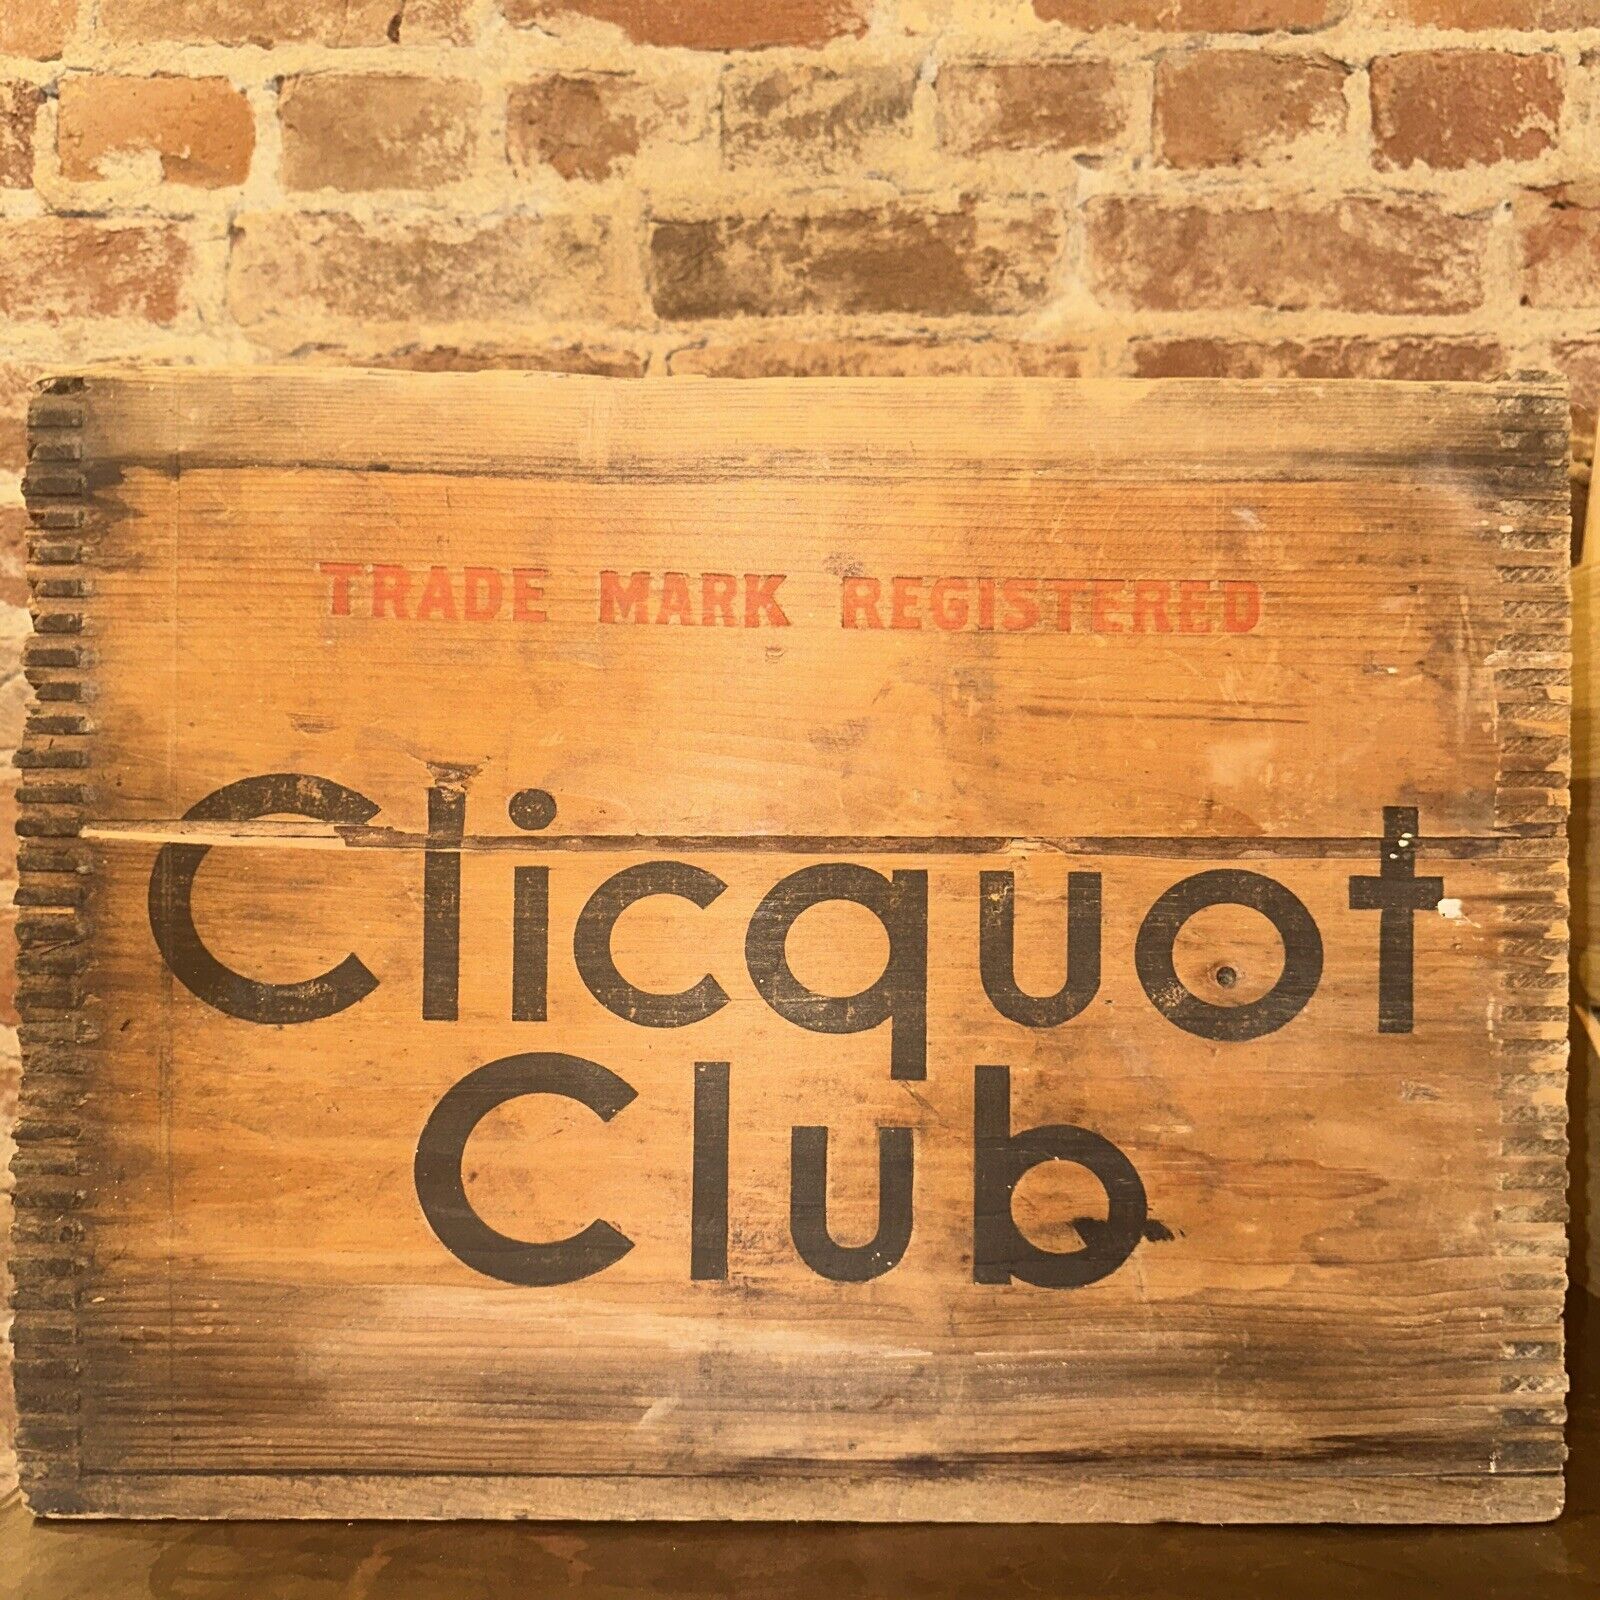 Vintage Clicquot Club Wooden Delivery Bottle Crate Display Advertising